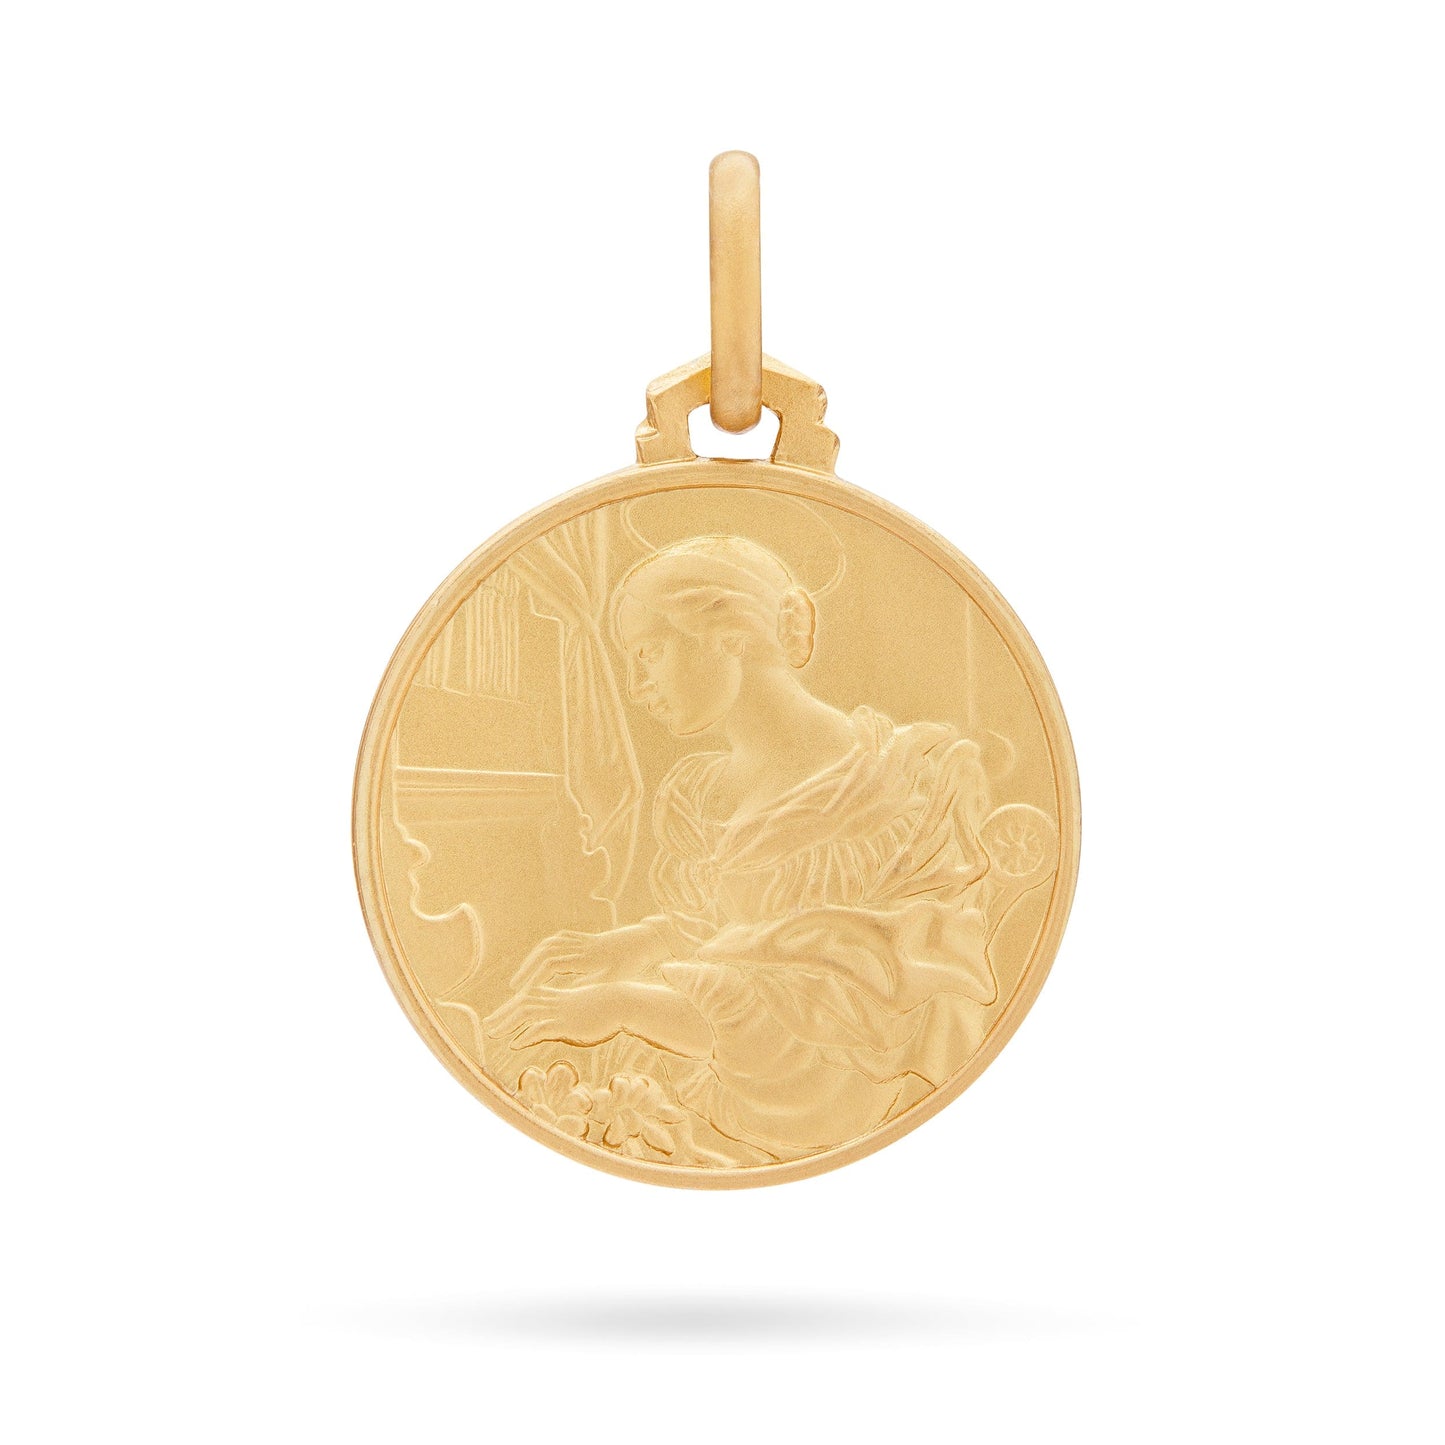 MONDO CATTOLICO 18 mm (0.70 in) Yellow Gold Medal of Saint Cecilia